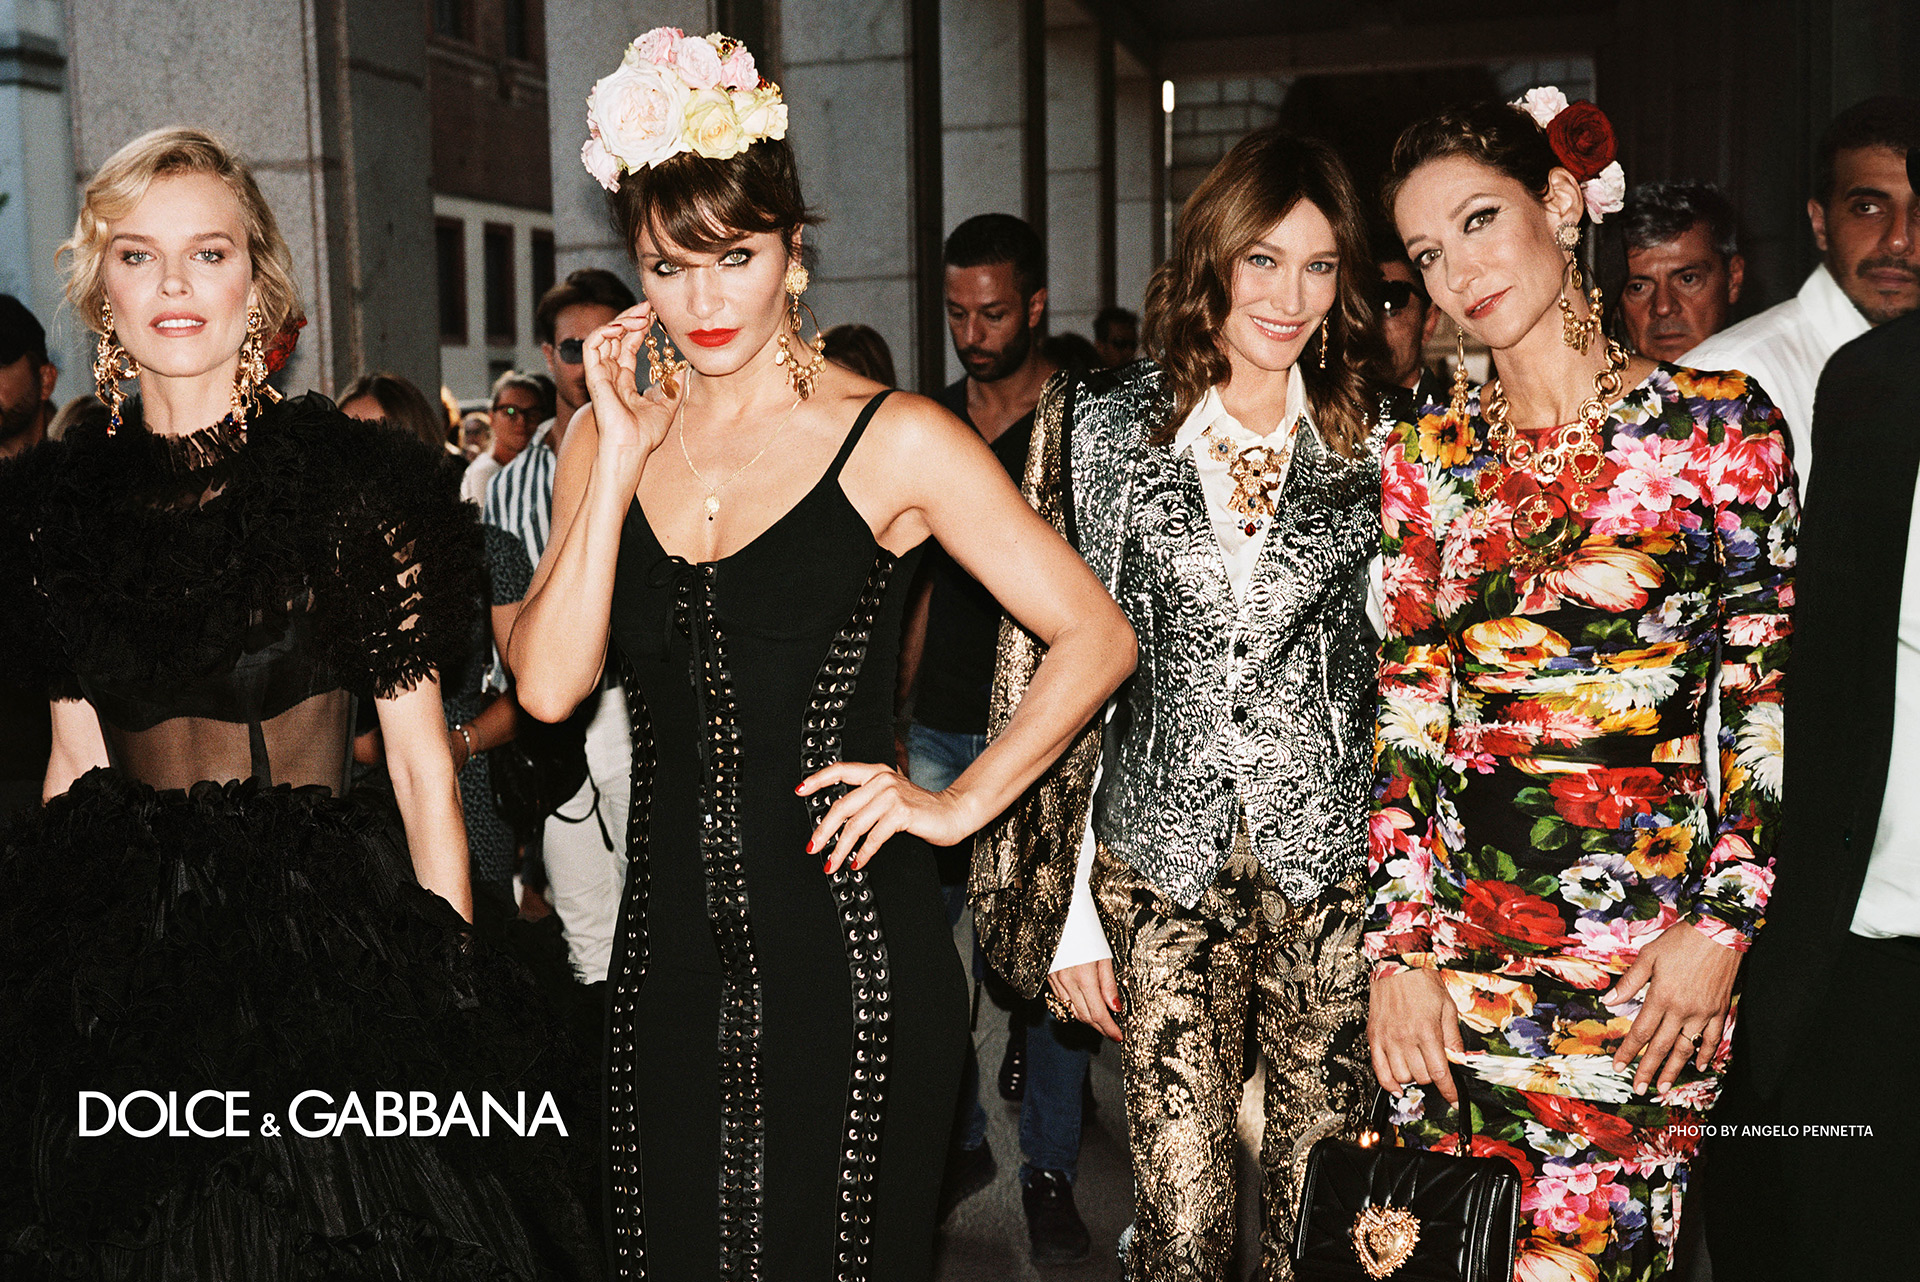 dolce and gabbana advertisements